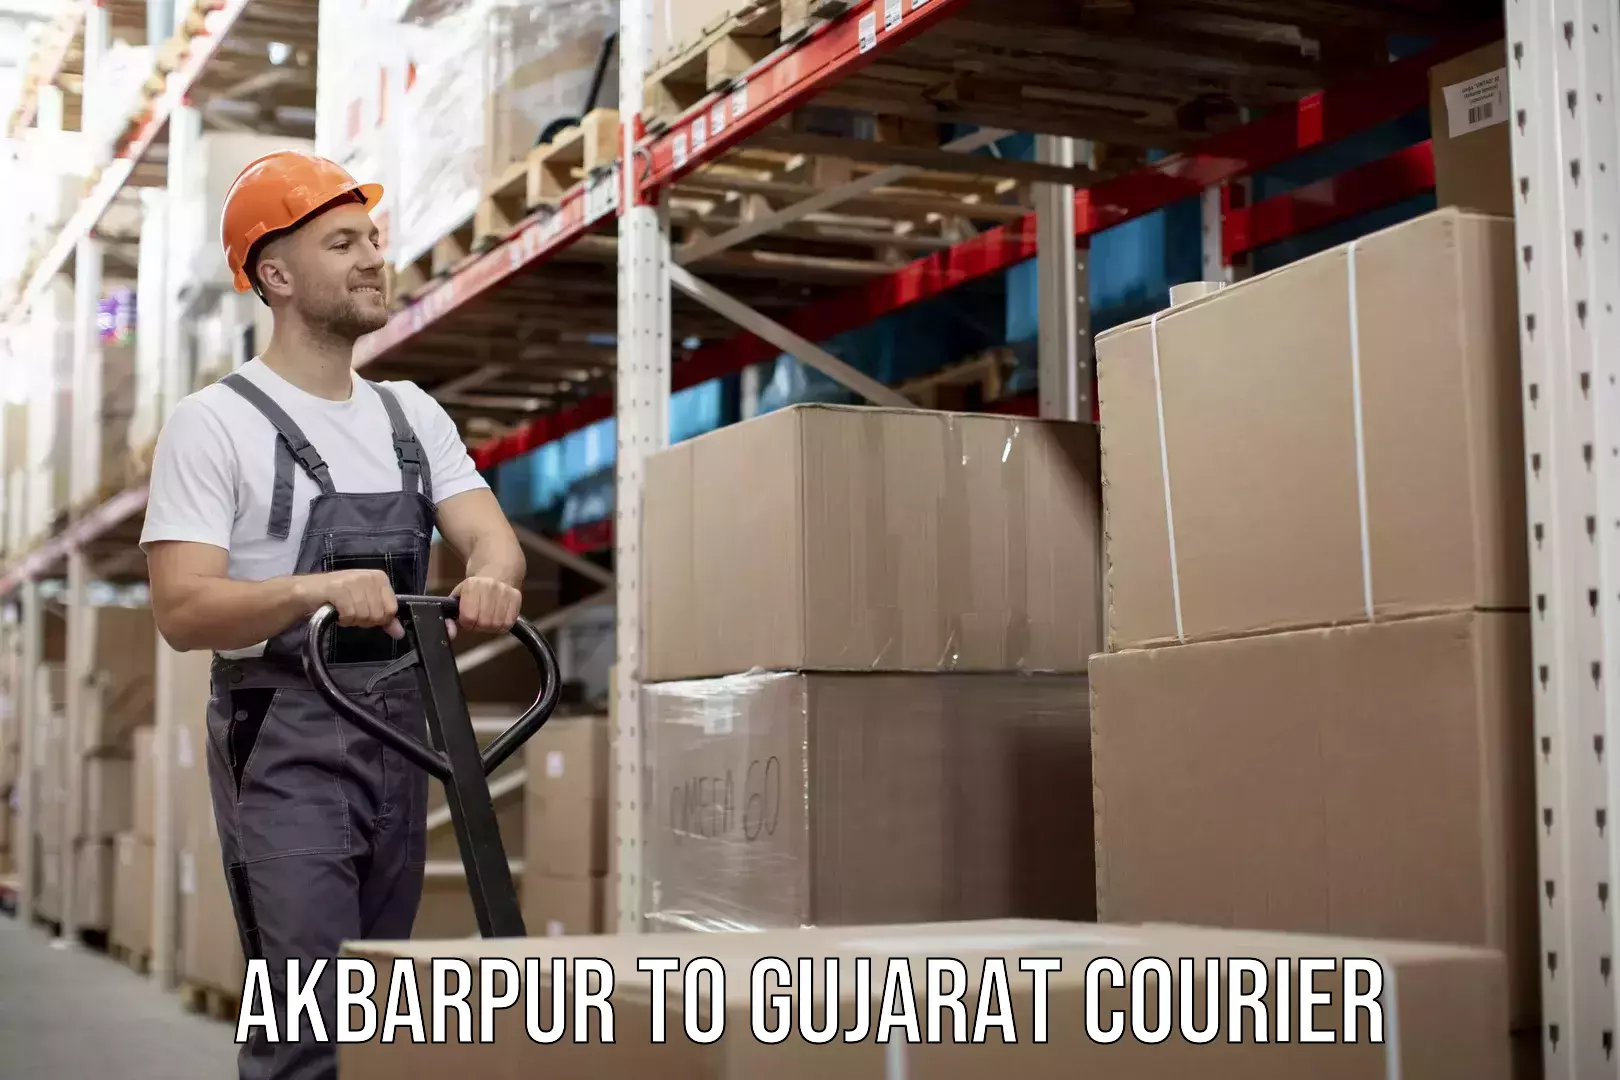 Express delivery network Akbarpur to Gujarat